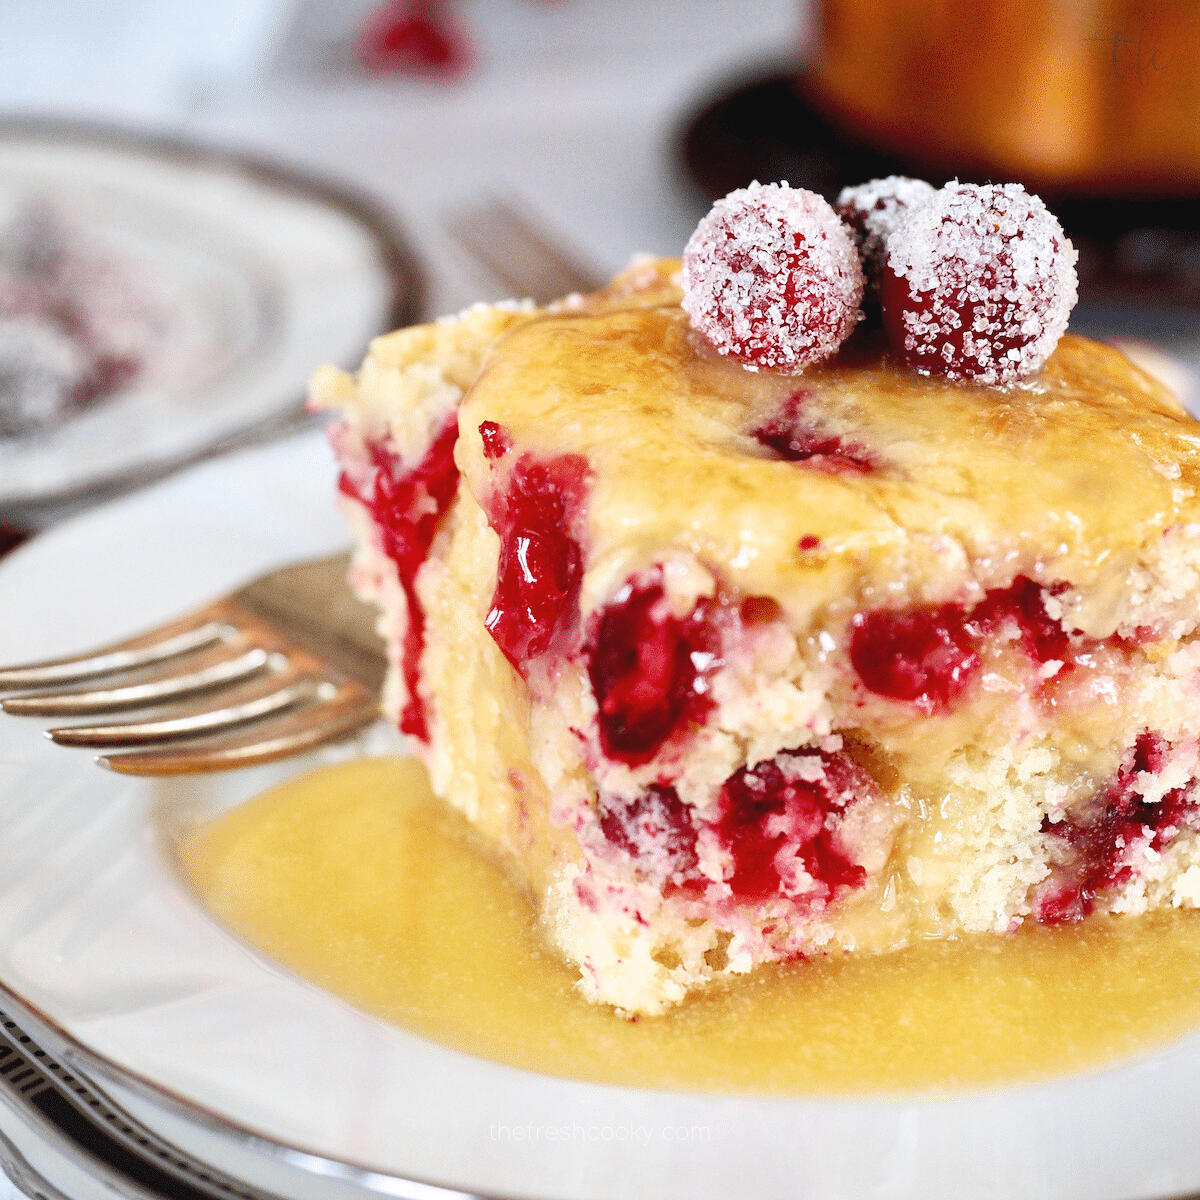 Cranberry Christmas Cake slice on a plate drizzled with vanilla butter sauce and topped with sugared cranberries.